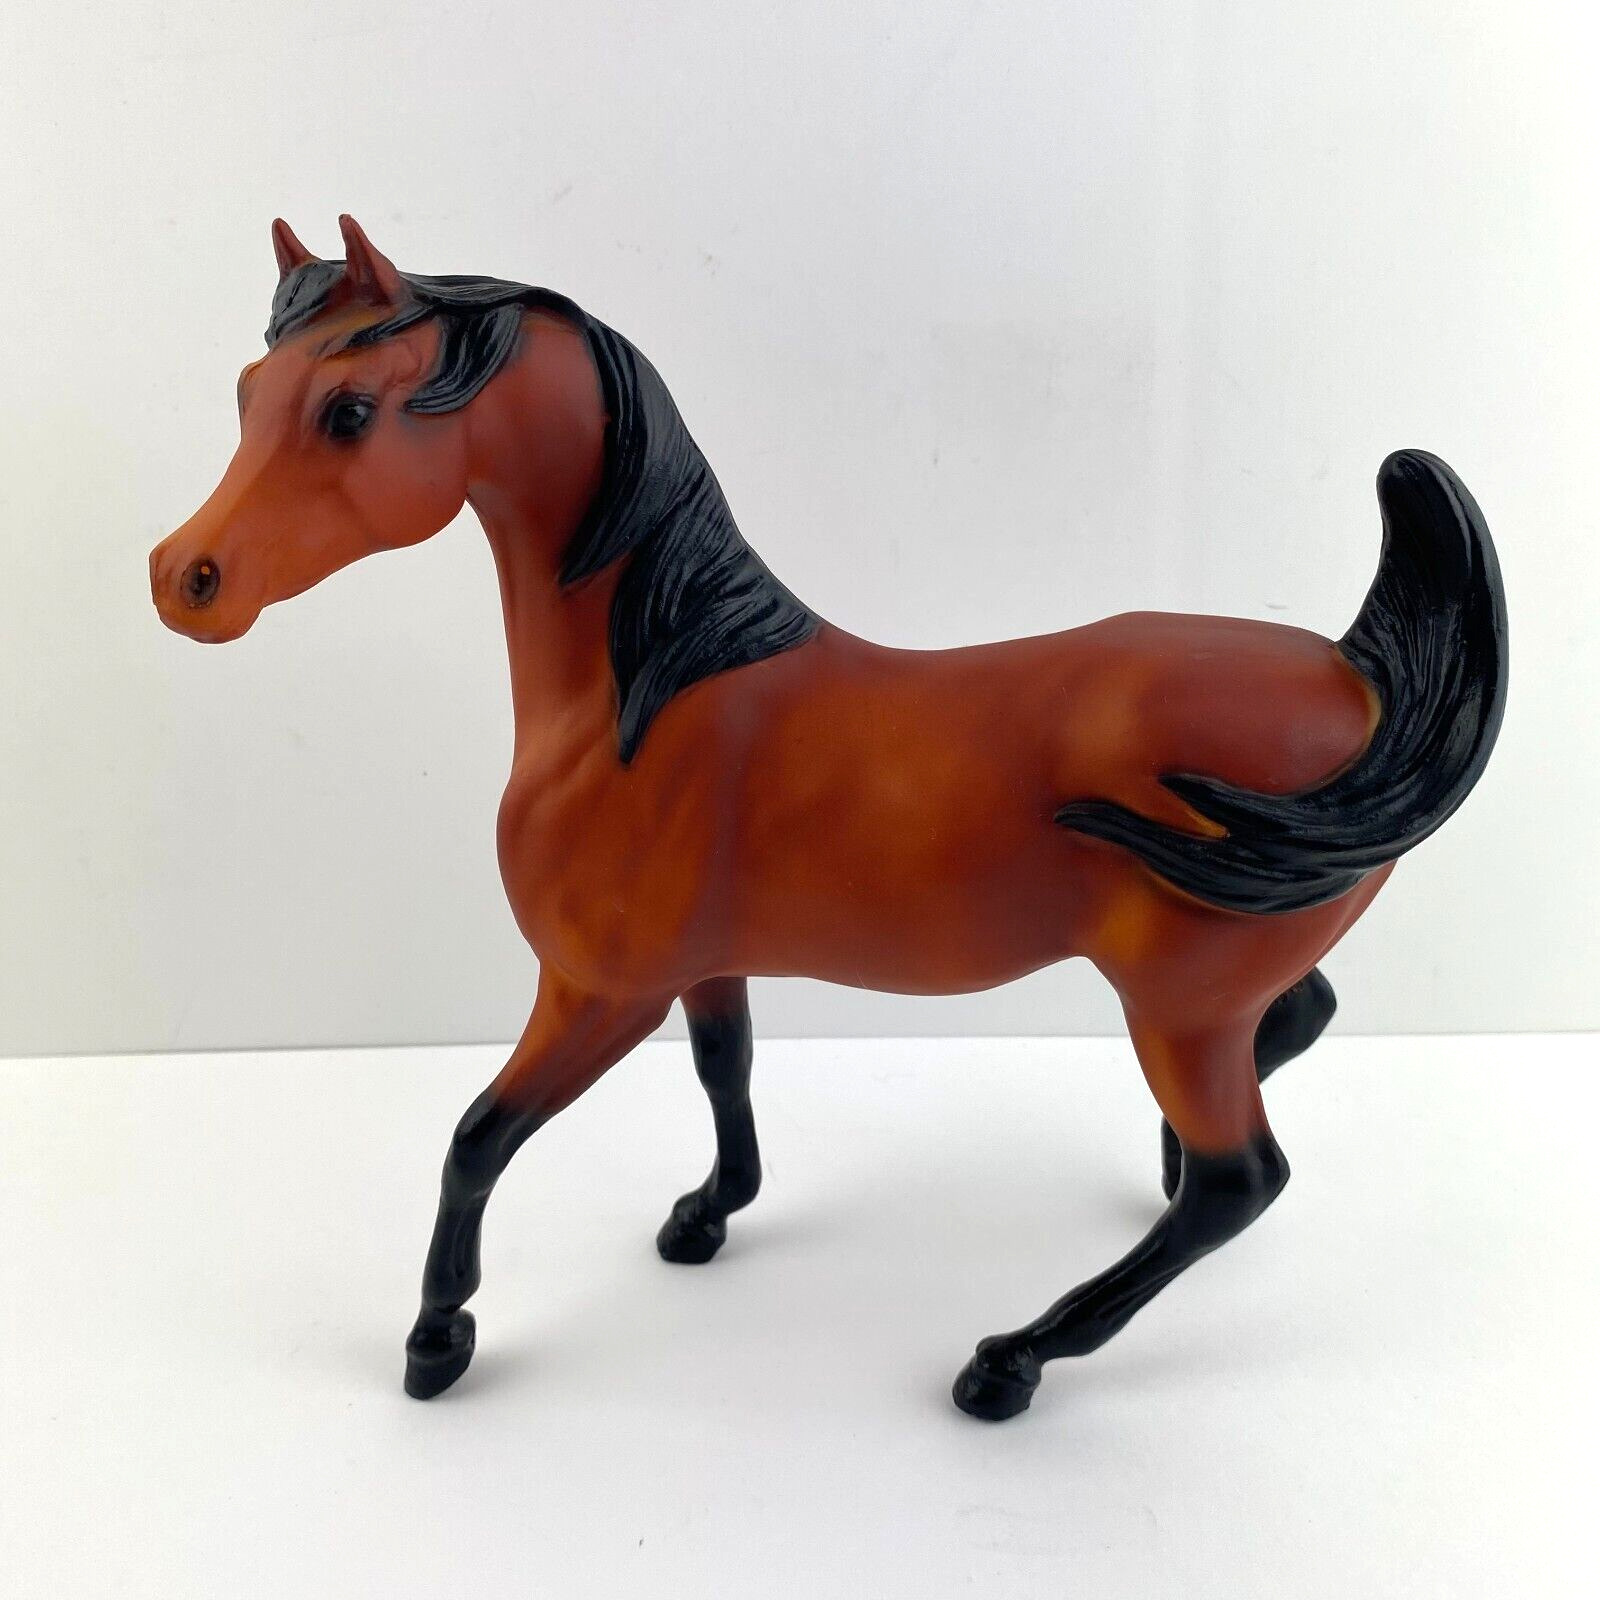 Breyer SHAM - QVC version #701595 Only 1300 made - Traditional Horse